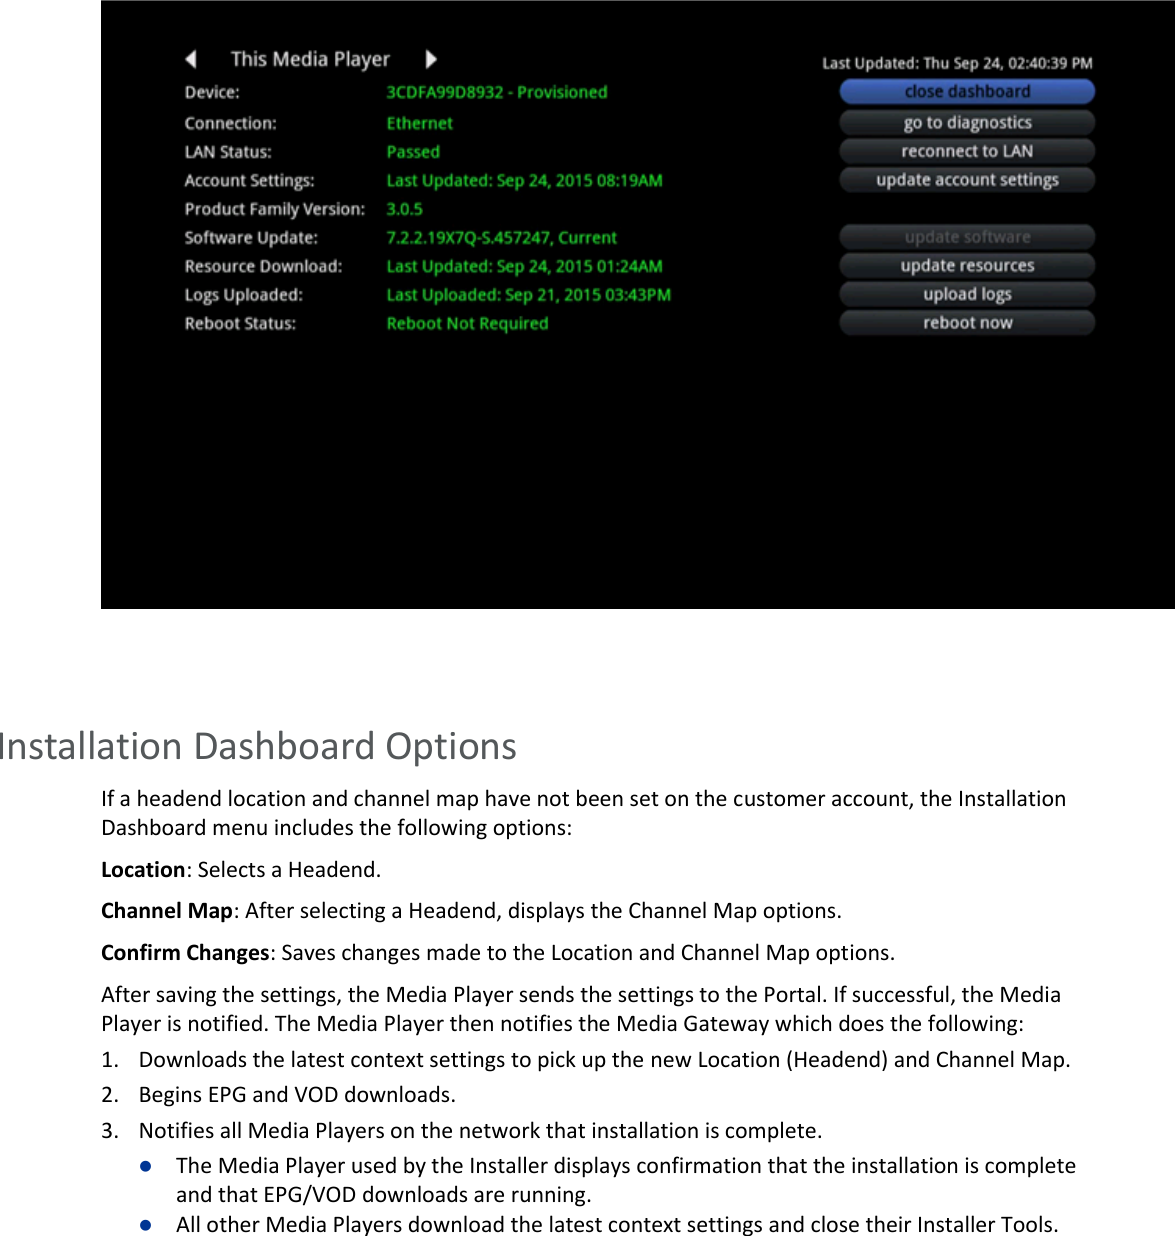         Installation Dashboard Options If a headend location and channel map have not been set on the customer account, the Installation Dashboard menu includes the following options: Location: Selects a Headend. Channel Map: After selecting a Headend, displays the Channel Map options.  Confirm Changes: Saves changes made to the Location and Channel Map options. After saving the settings, the Media Player sends the settings to the Portal. If successful, the Media Player is notified. The Media Player then notifies the Media Gateway which does the following: 1. Downloads the latest context settings to pick up the new Location (Headend) and Channel Map. 2. Begins EPG and VOD downloads. 3. Notifies all Media Players on the network that installation is complete.  The Media Player used by the Installer displays confirmation that the installation is complete and that EPG/VOD downloads are running.  All other Media Players download the latest context settings and close their Installer Tools.   